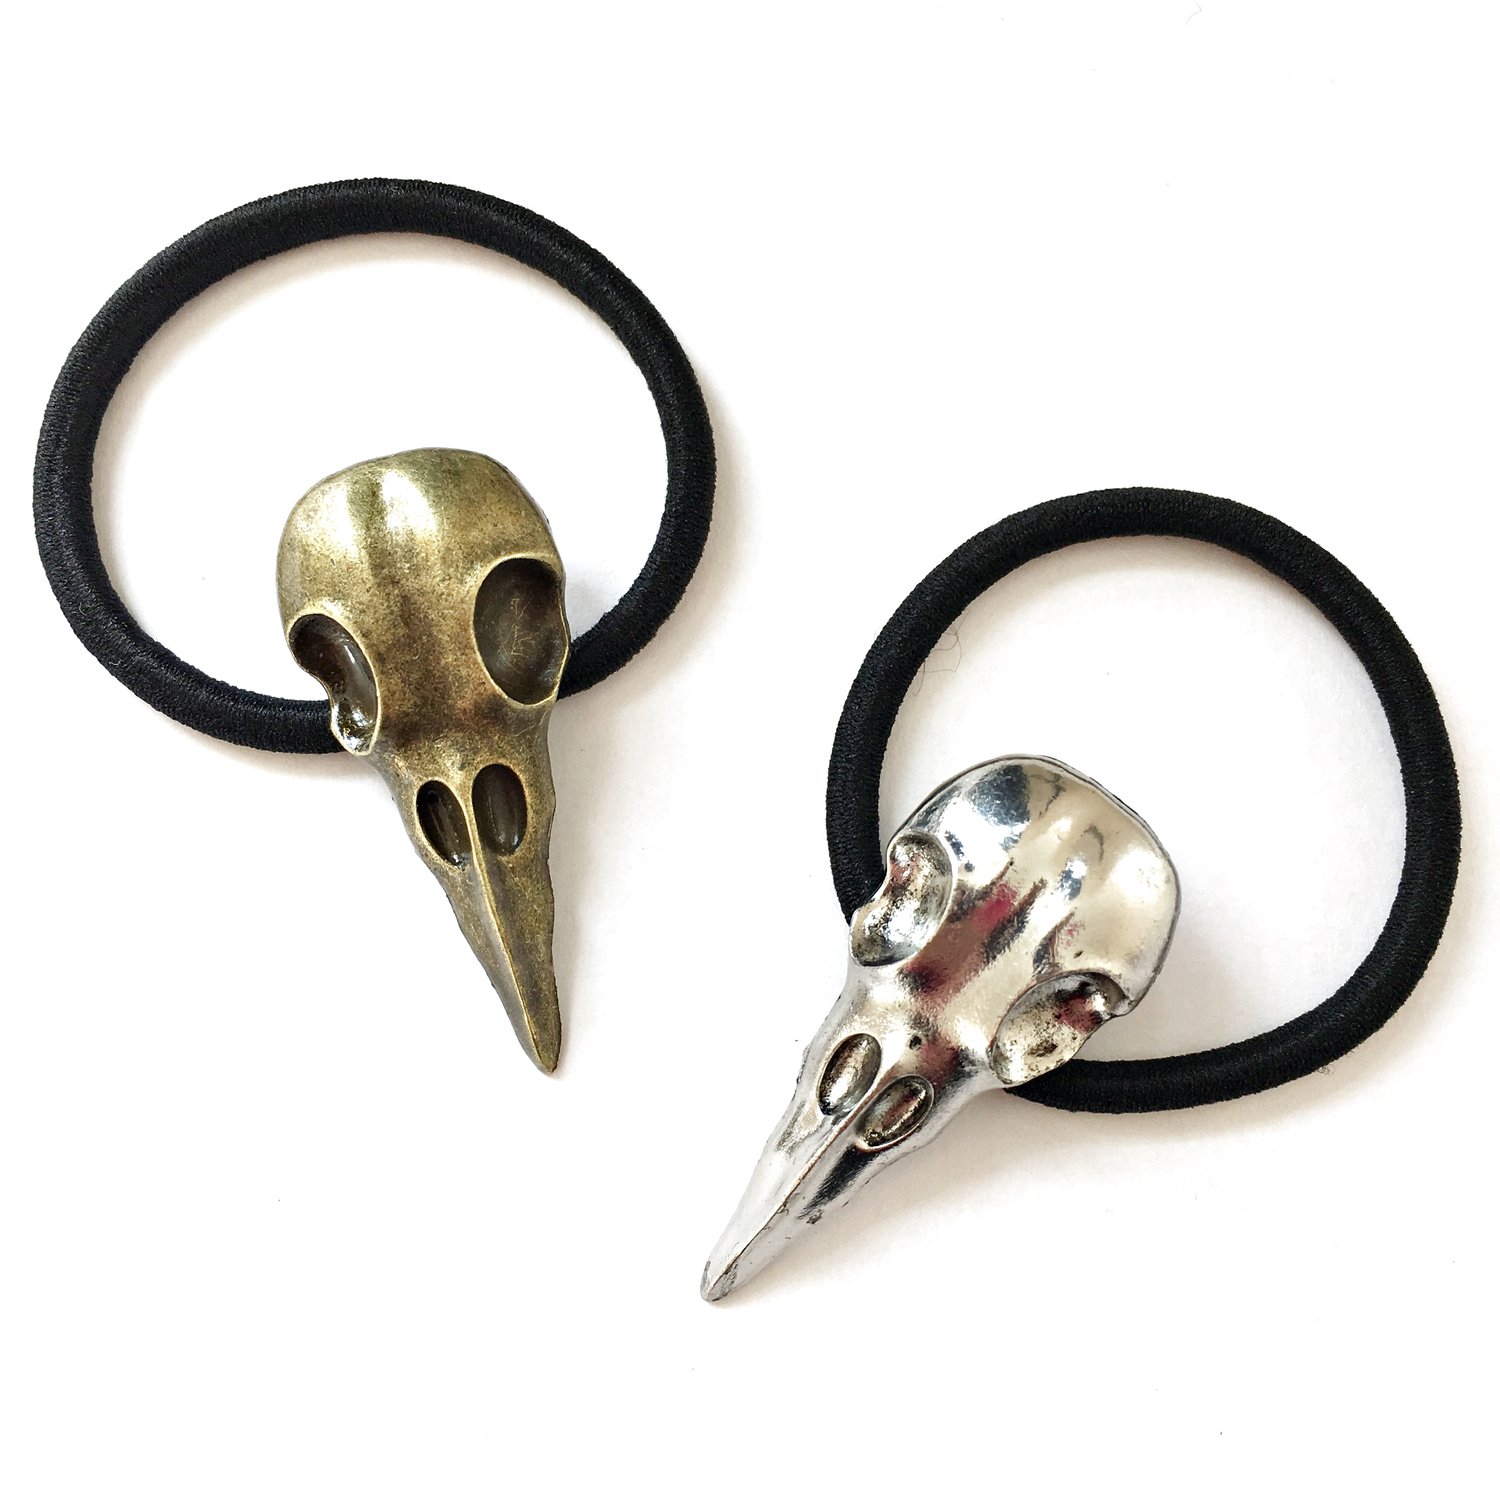 Creepy Crow Skull Hair Tie Bobble | Stoned Affection